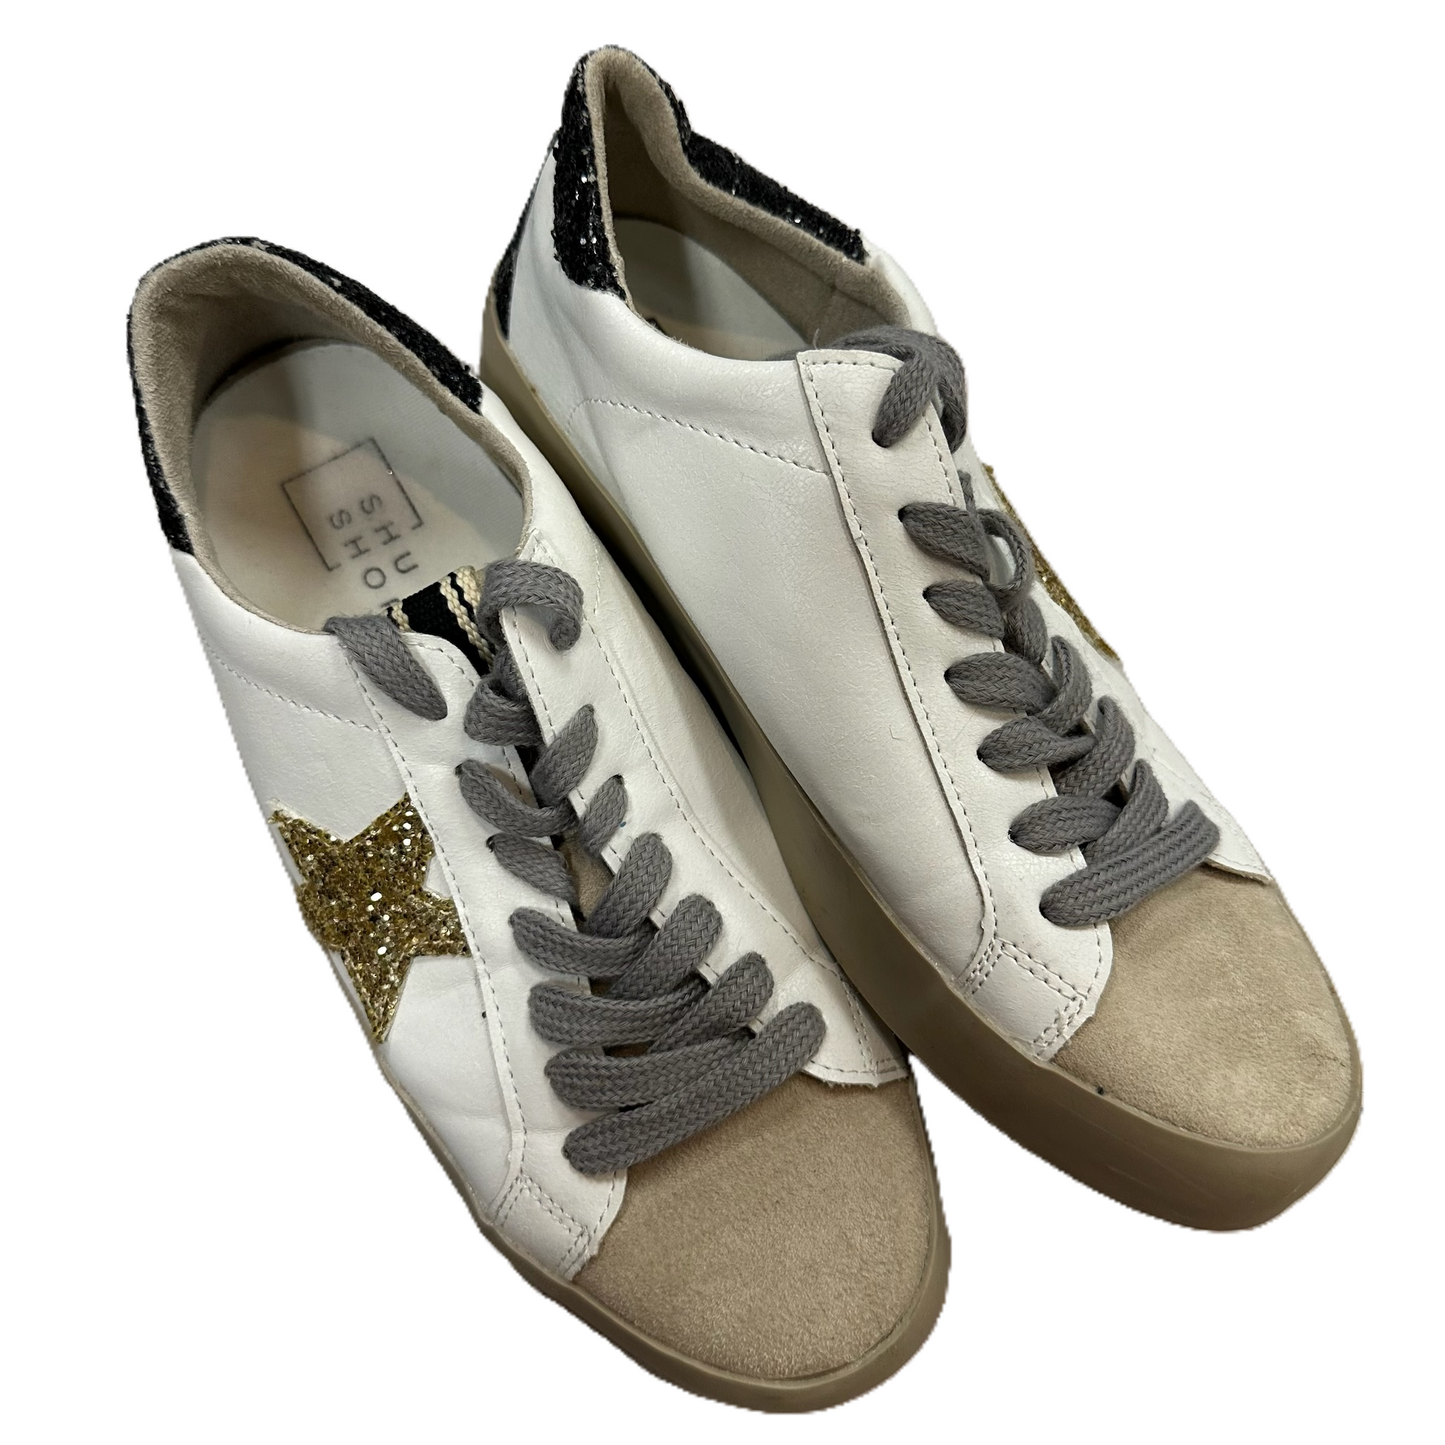 Cream Shoes Sneakers By Shu Shop, Size: 6